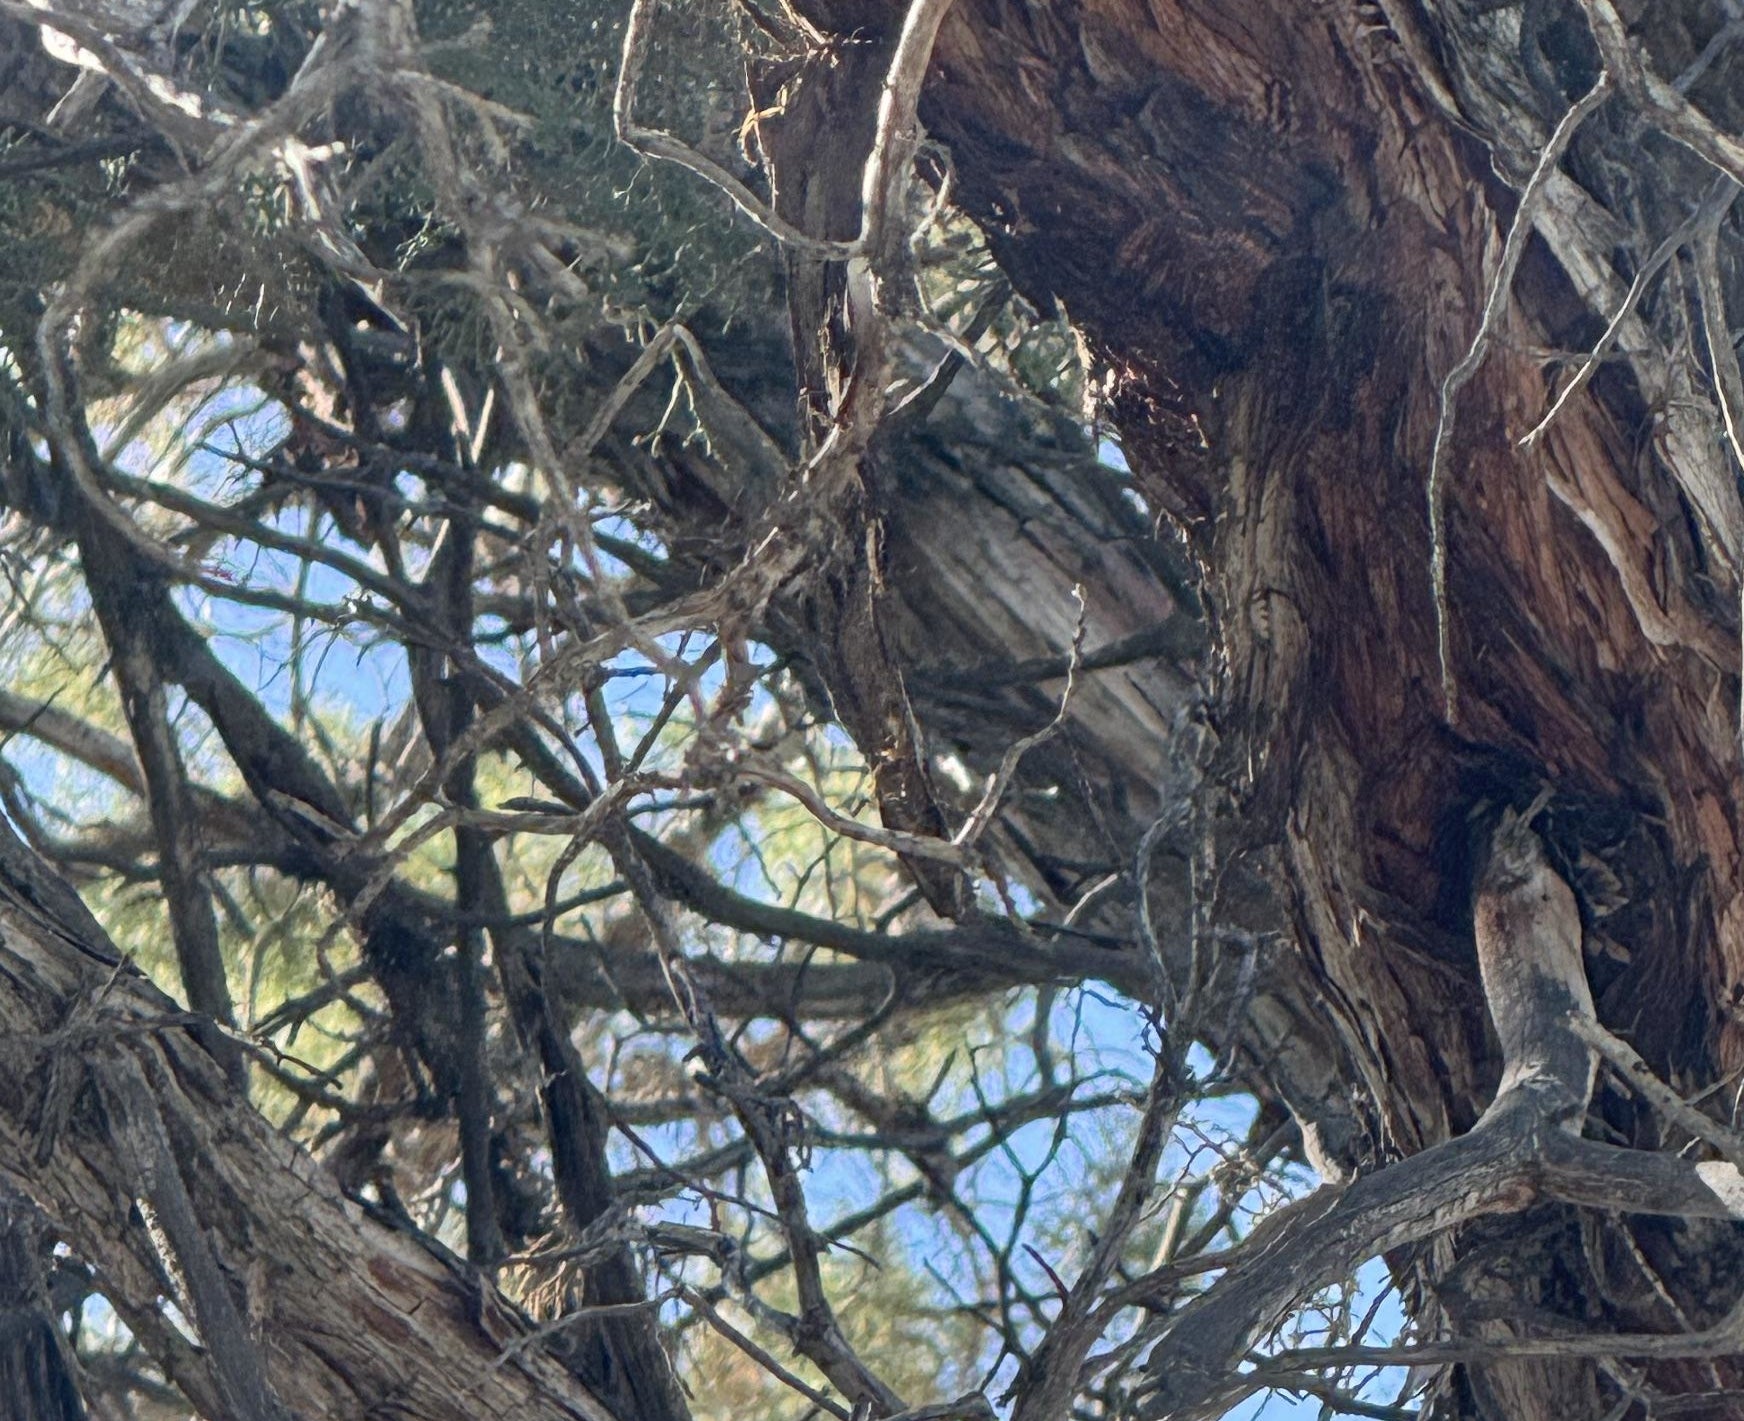 Two great horned owls camouflaged in a tree with intricate branches and foliage in a daylight setting